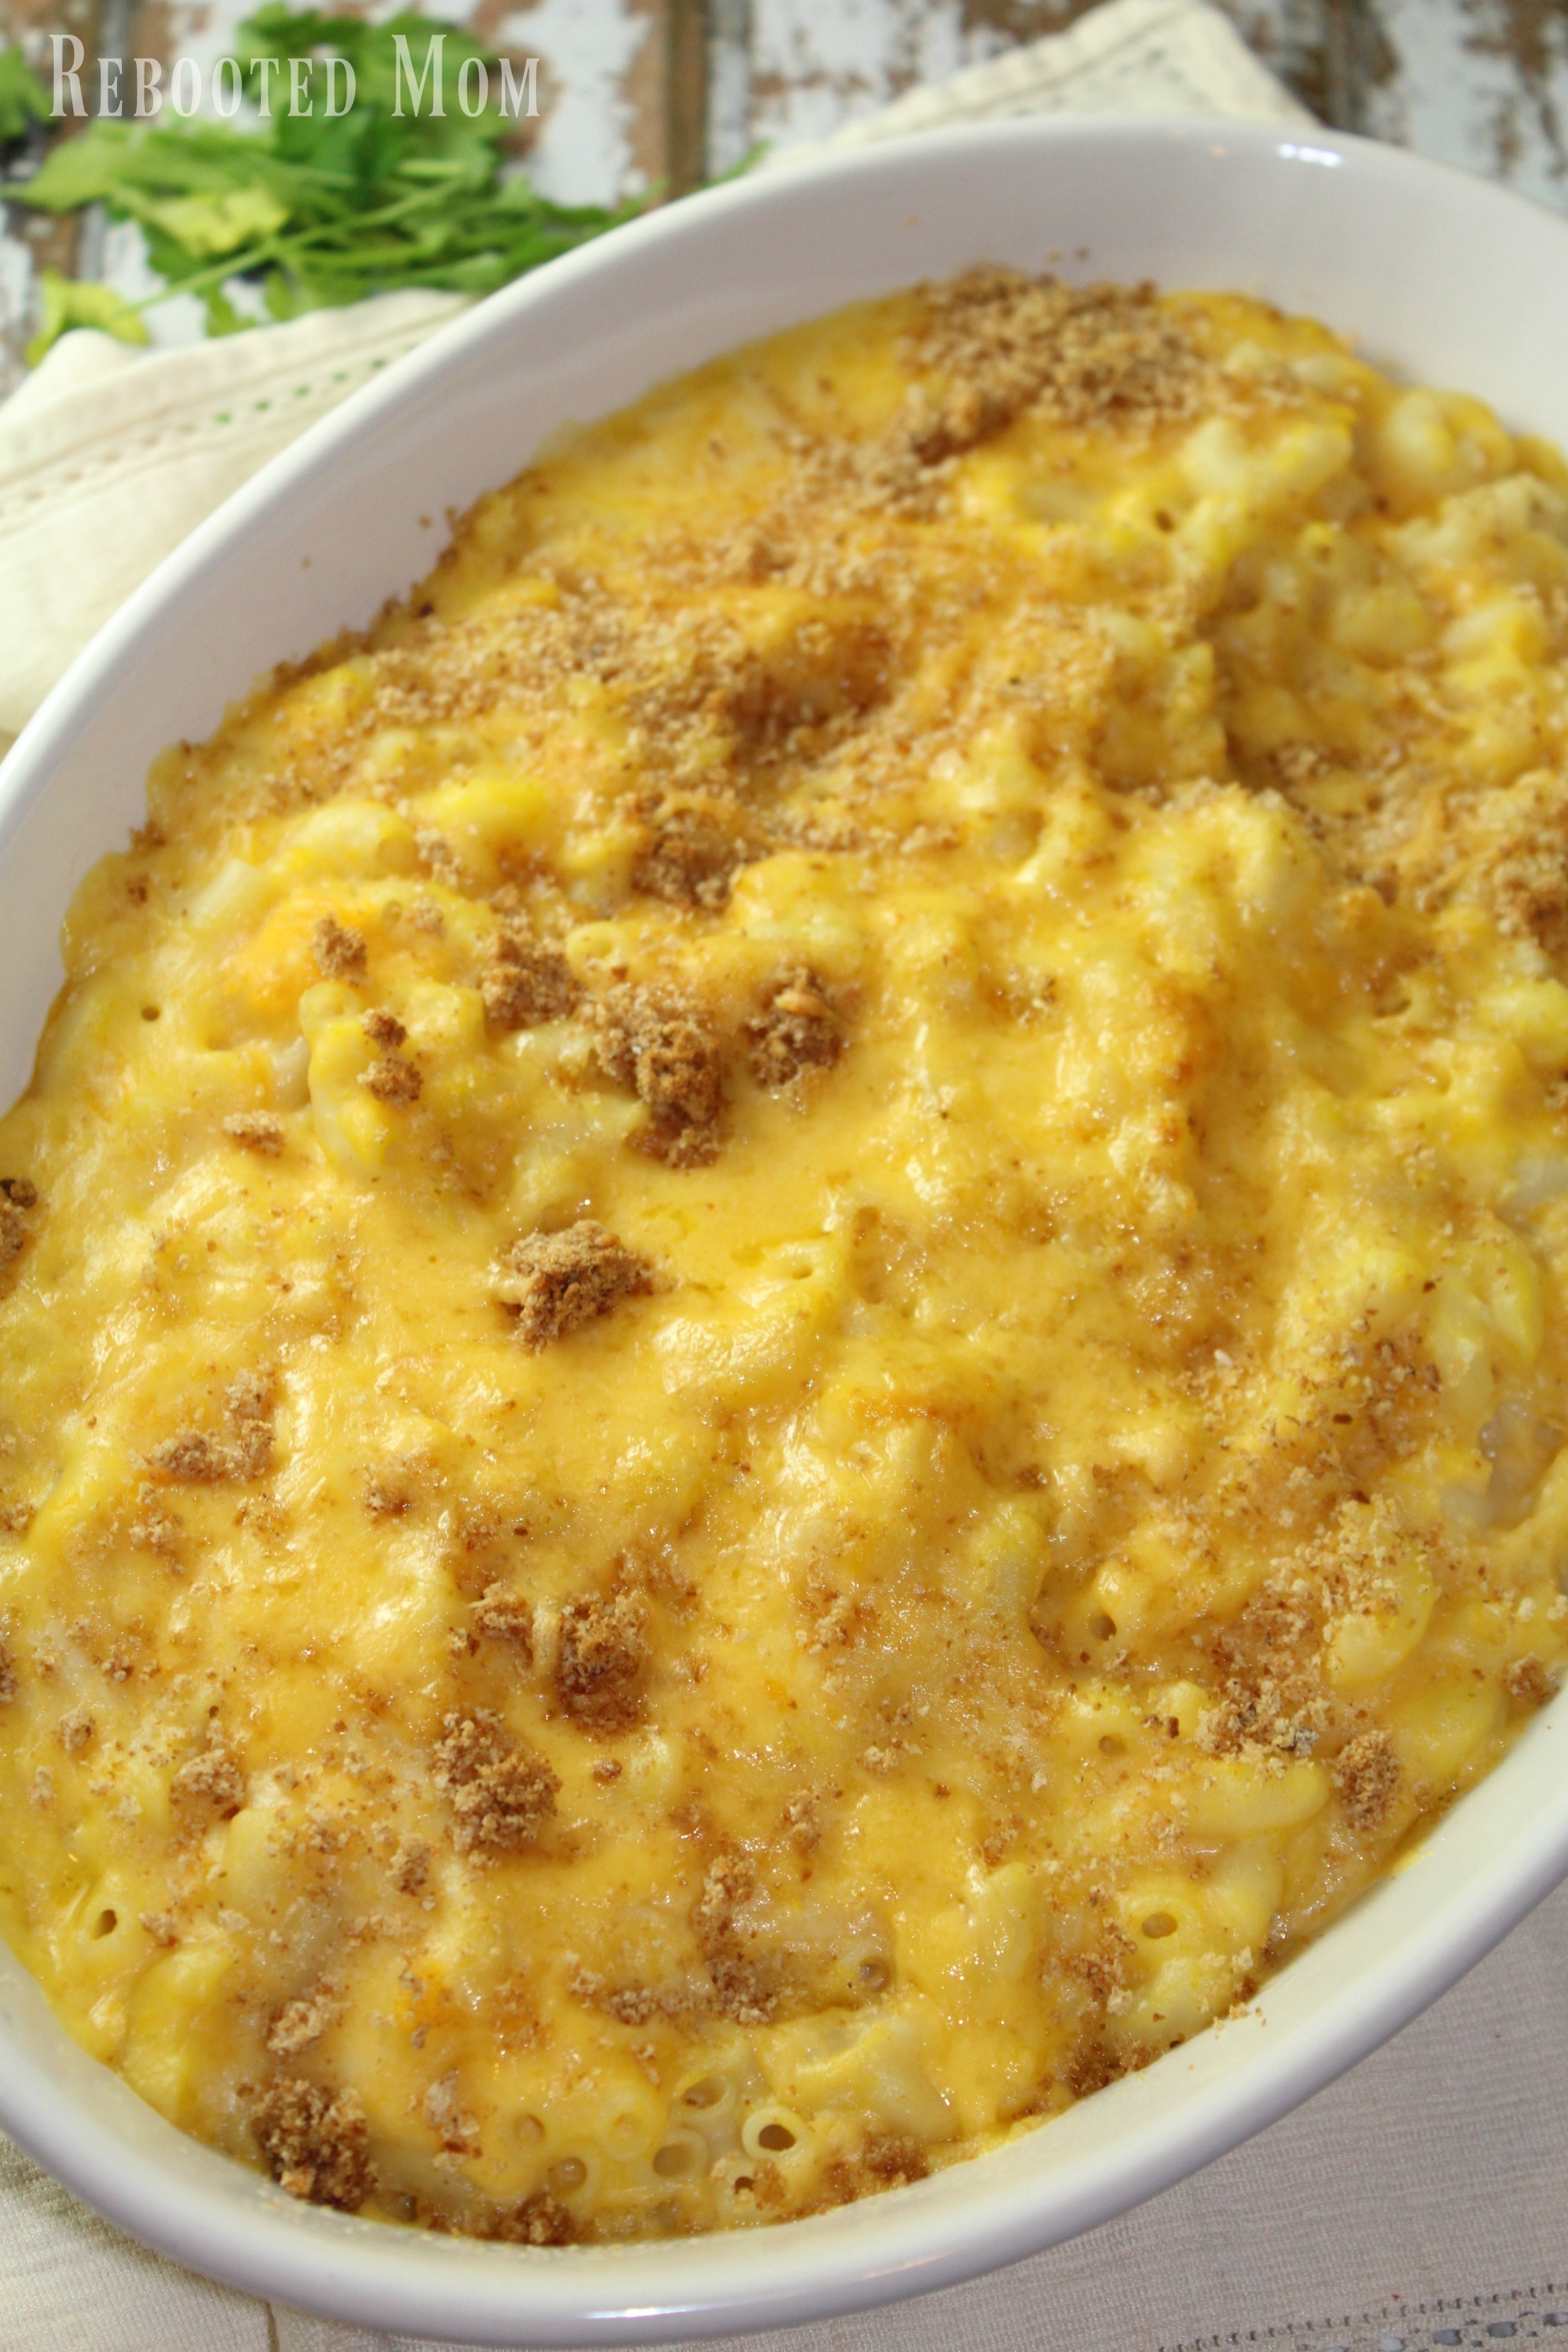 An amazingly delicious twist on traditional macaroni & cheese by incorporating butternut squash.